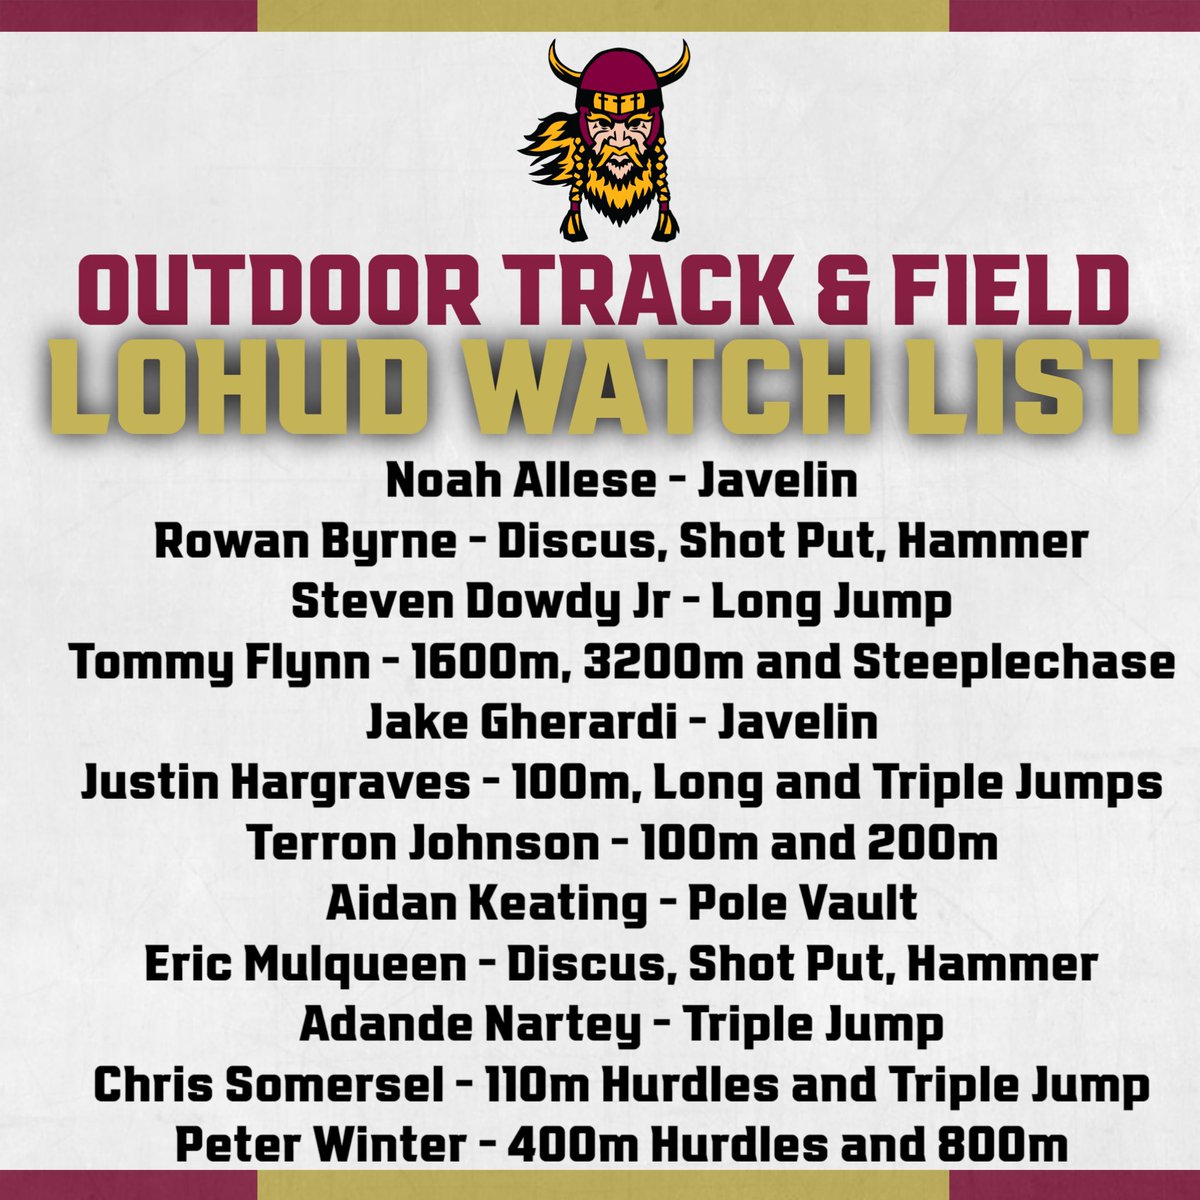 Congrats to our outdoor track & field student-athletes who were named to the spring watch list!! #GoGaels